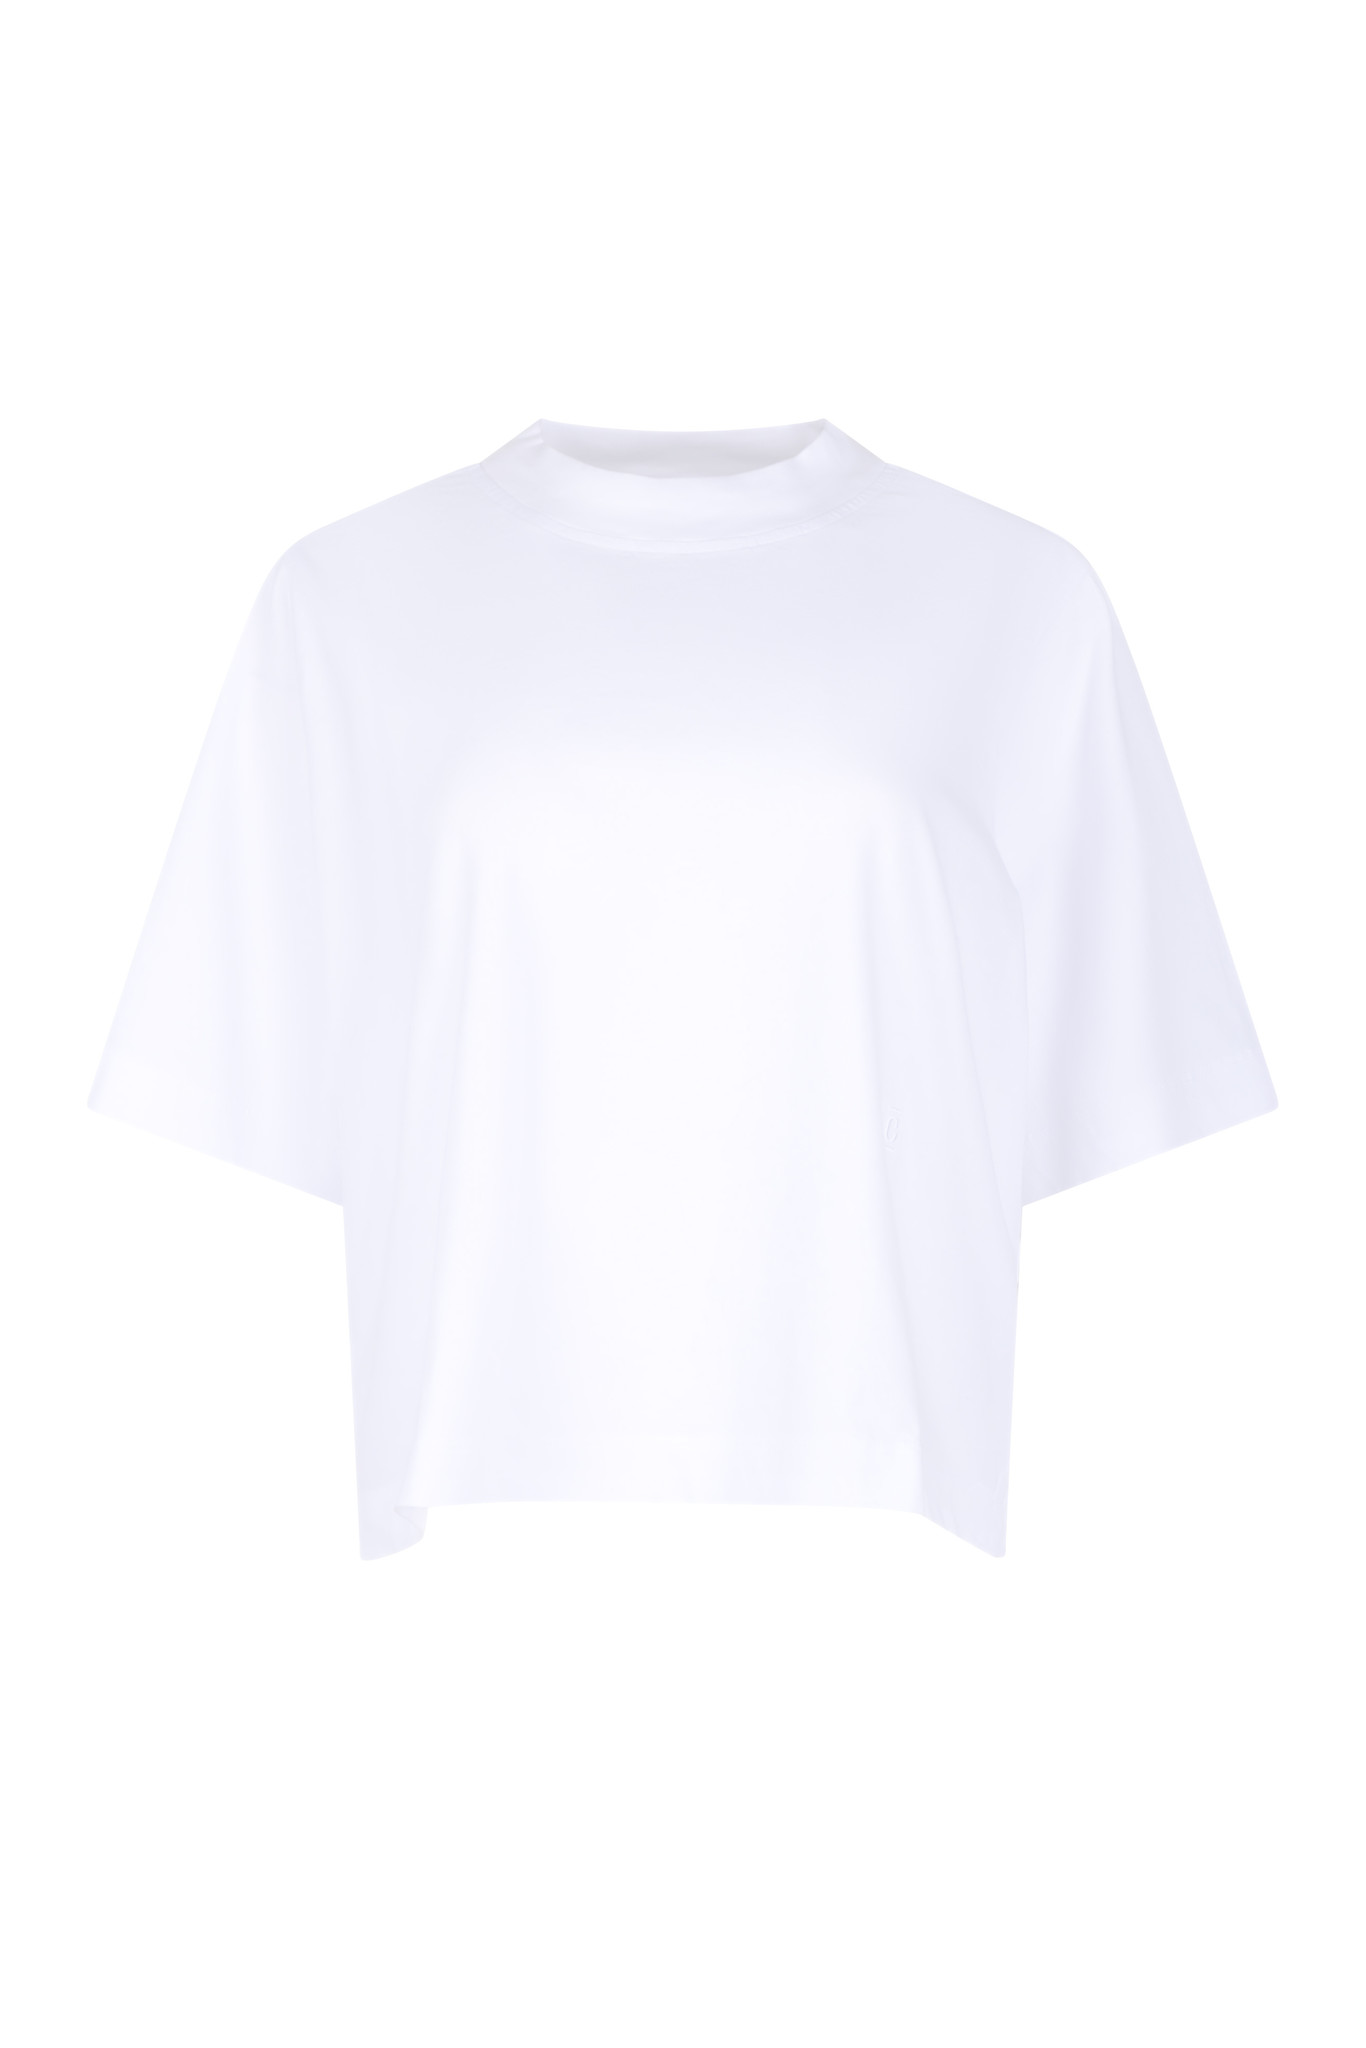 Cropped T-Shirt in White-1